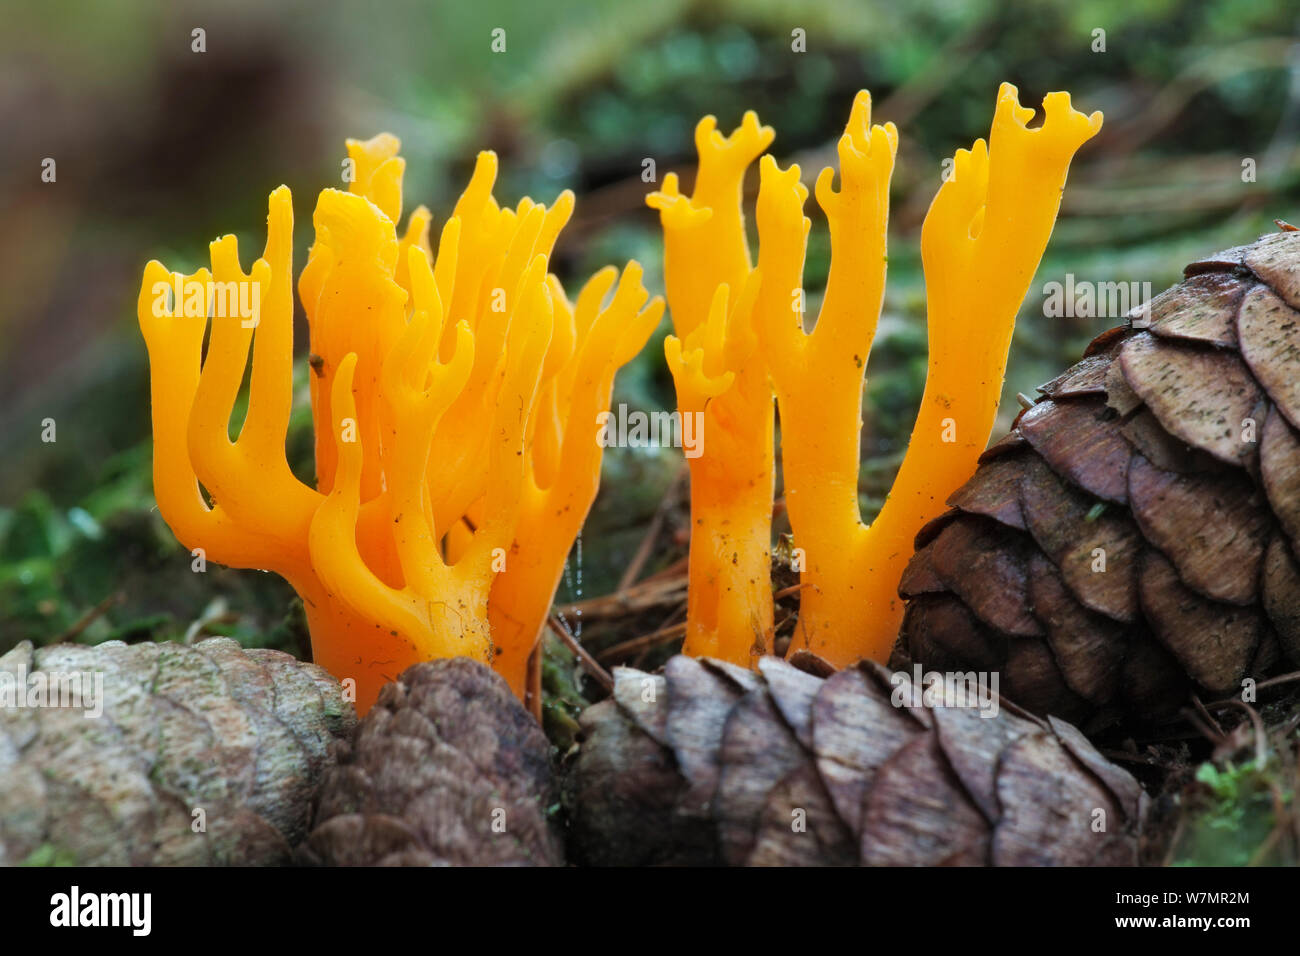 Yellow Antler Fungus (Calocera viscosa). Bolderwood, New Forest National Park, Hampshire, England, UK, October. Did you know? There are more than 3,000 fungus species in the UK, and autumn is the best time to find them. Stock Photo